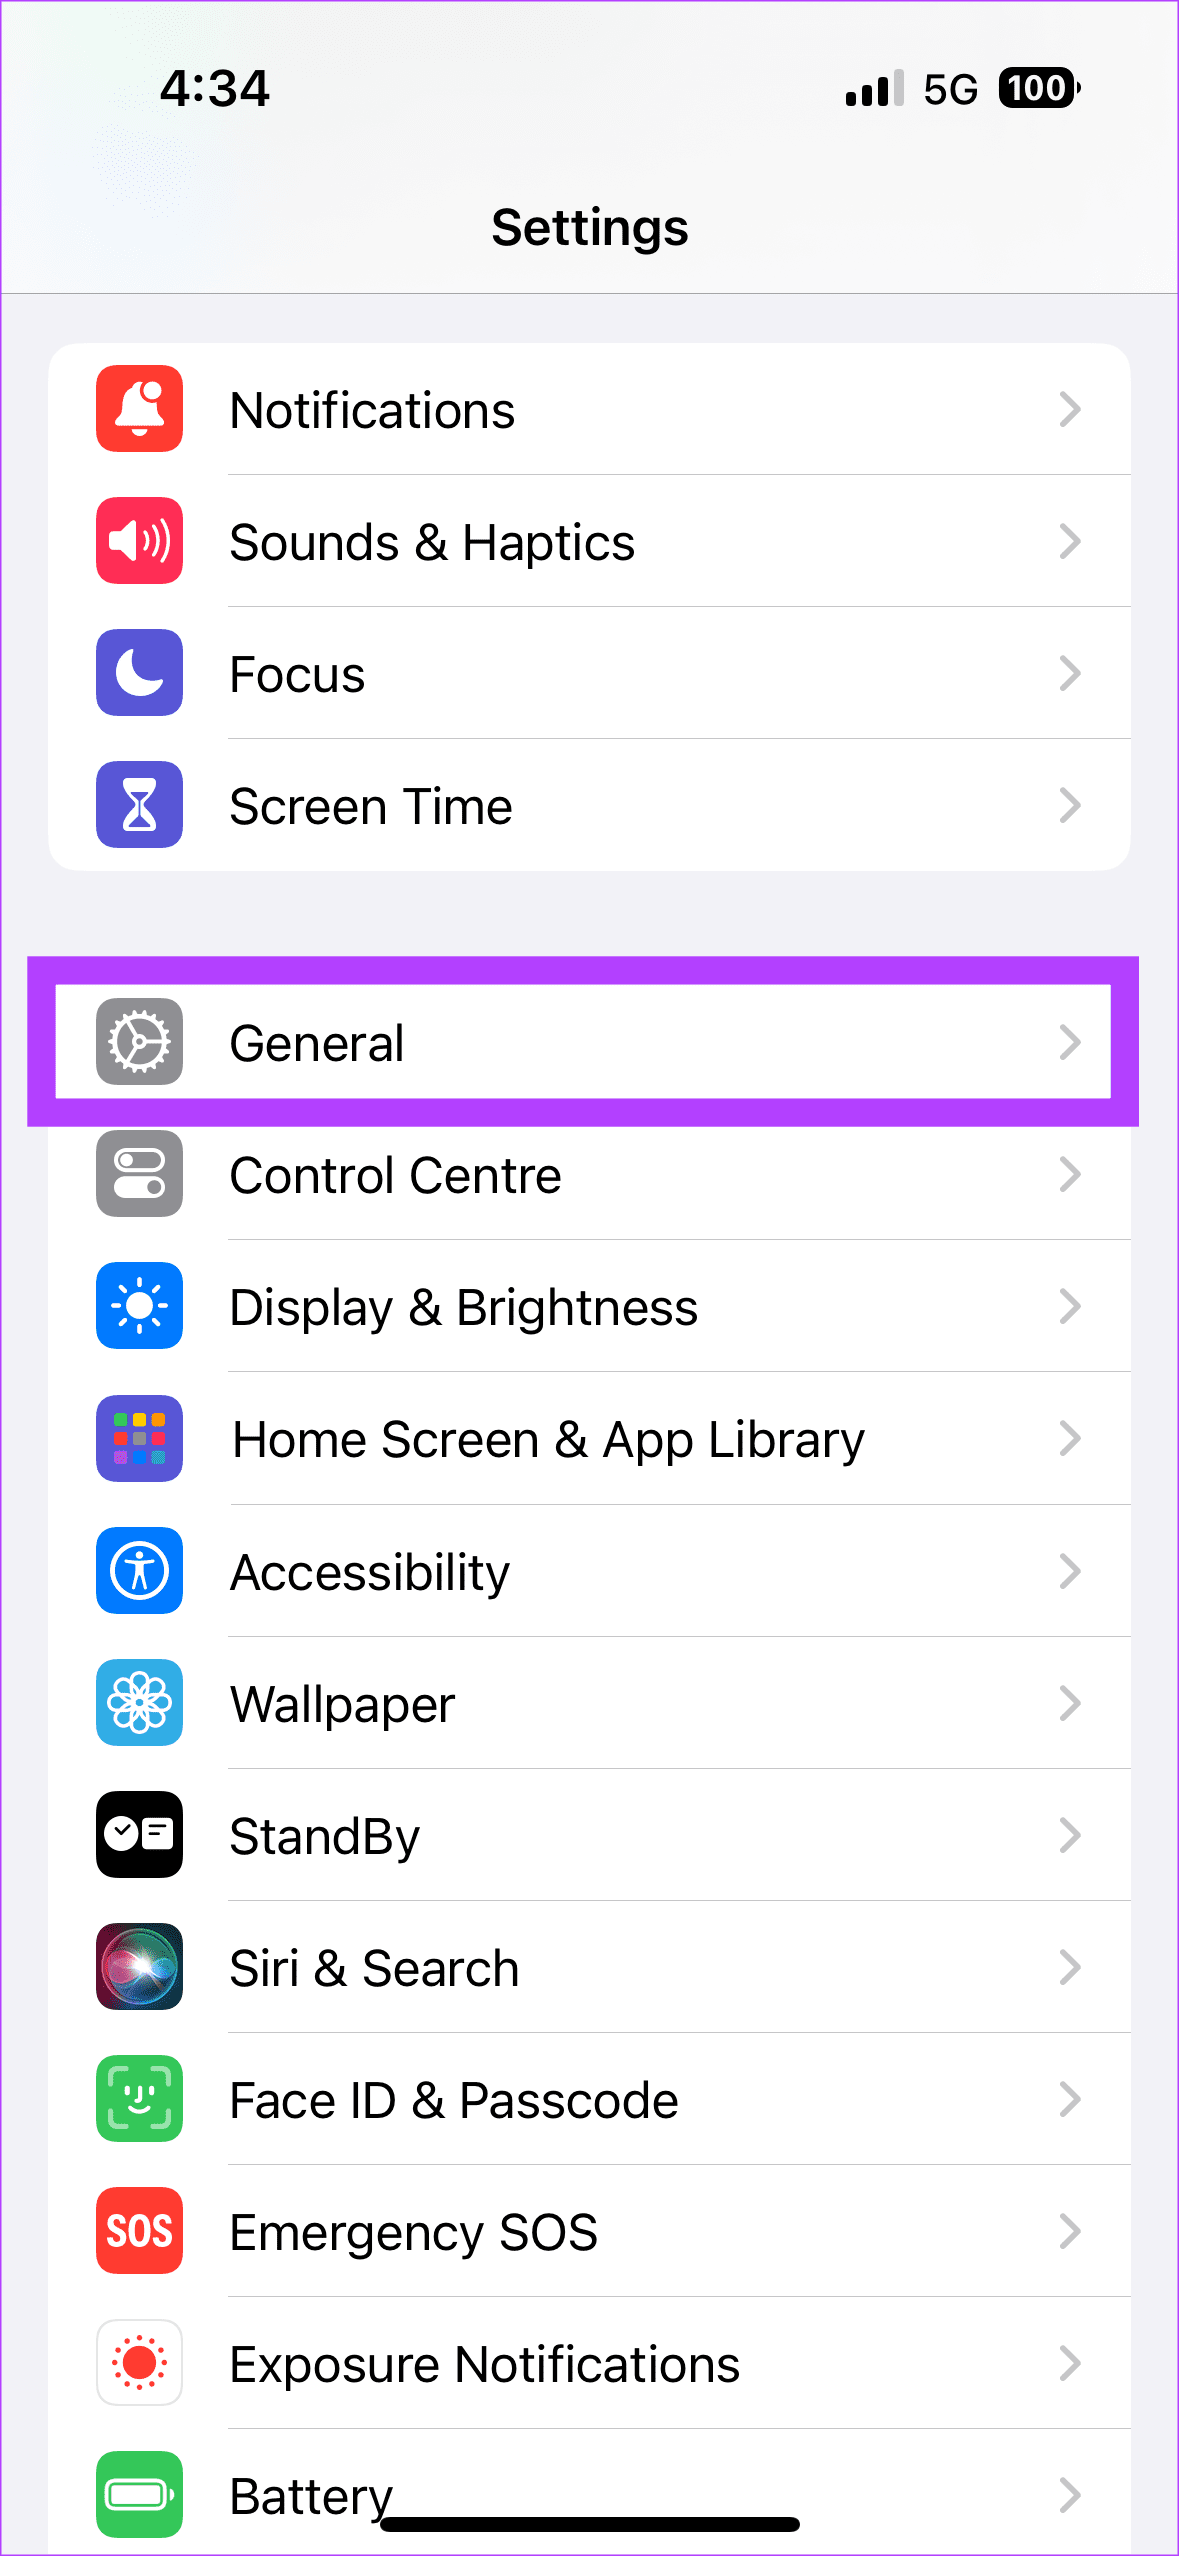 Open the Settings app on your iPhone and tap on General